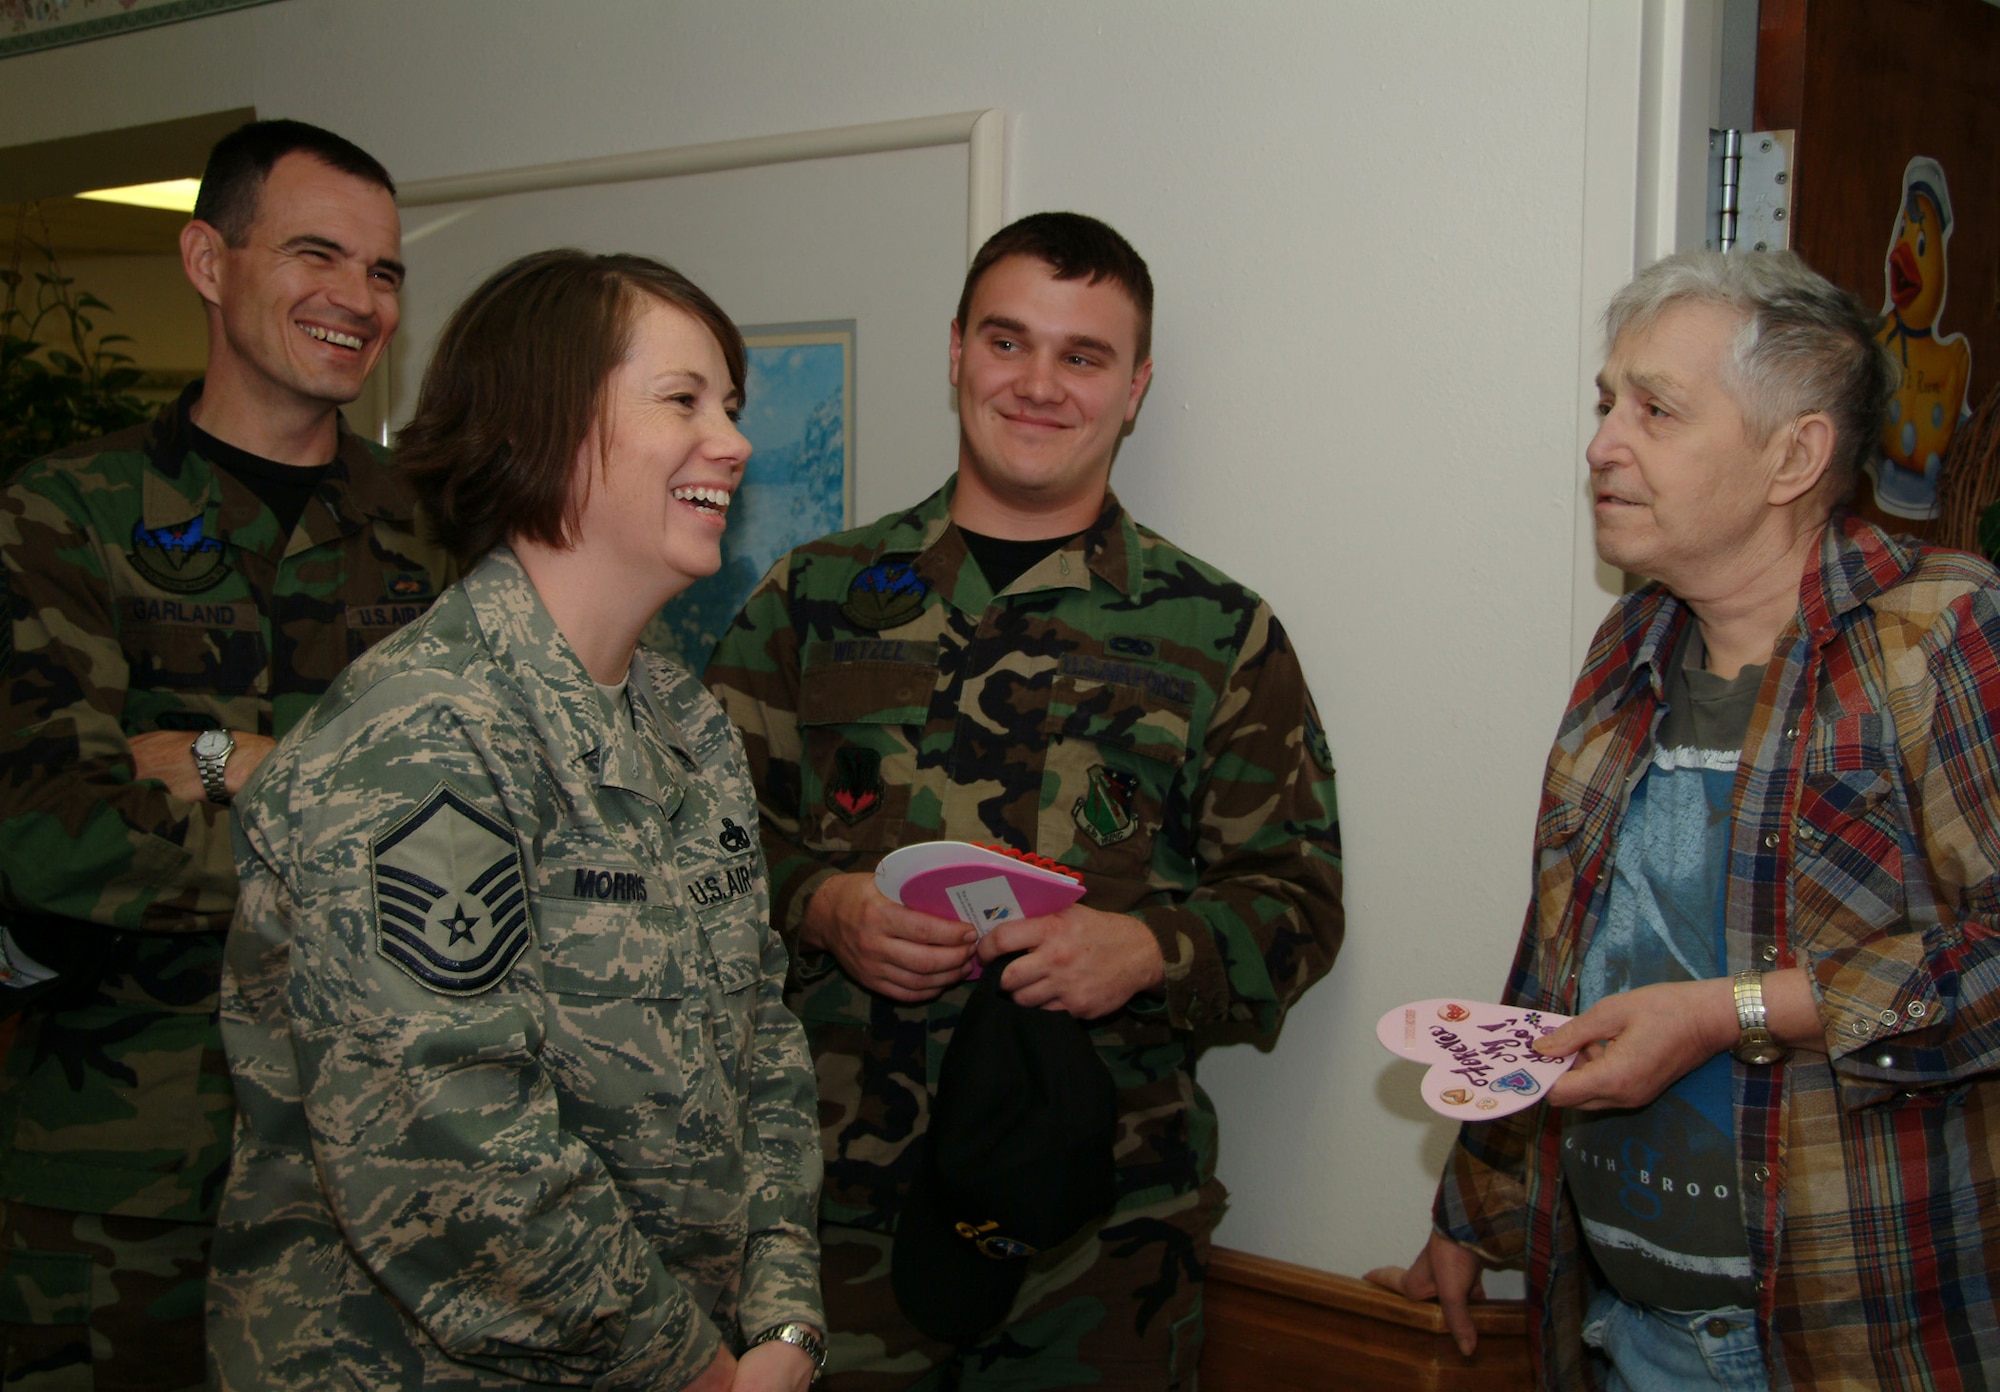 Master Sgt. Julie Morris, 16th Electronic Warfare Squadron, along with Senior Master Sgt. Michael Garland, 16th EWS, and Senior Airman Jon Wetzel, 16th EWS, visit with Wayne Parks Feb. 14 at the Silvercrest Rehabilitation Center in Crestview Fla.  More than 50 active duty 53d Wing members presented vets in nursing homes around the local area with cards and candy on Valentine's Day.  U.S. Air Force photo by Master Sgt. Andrew Leonhard.  